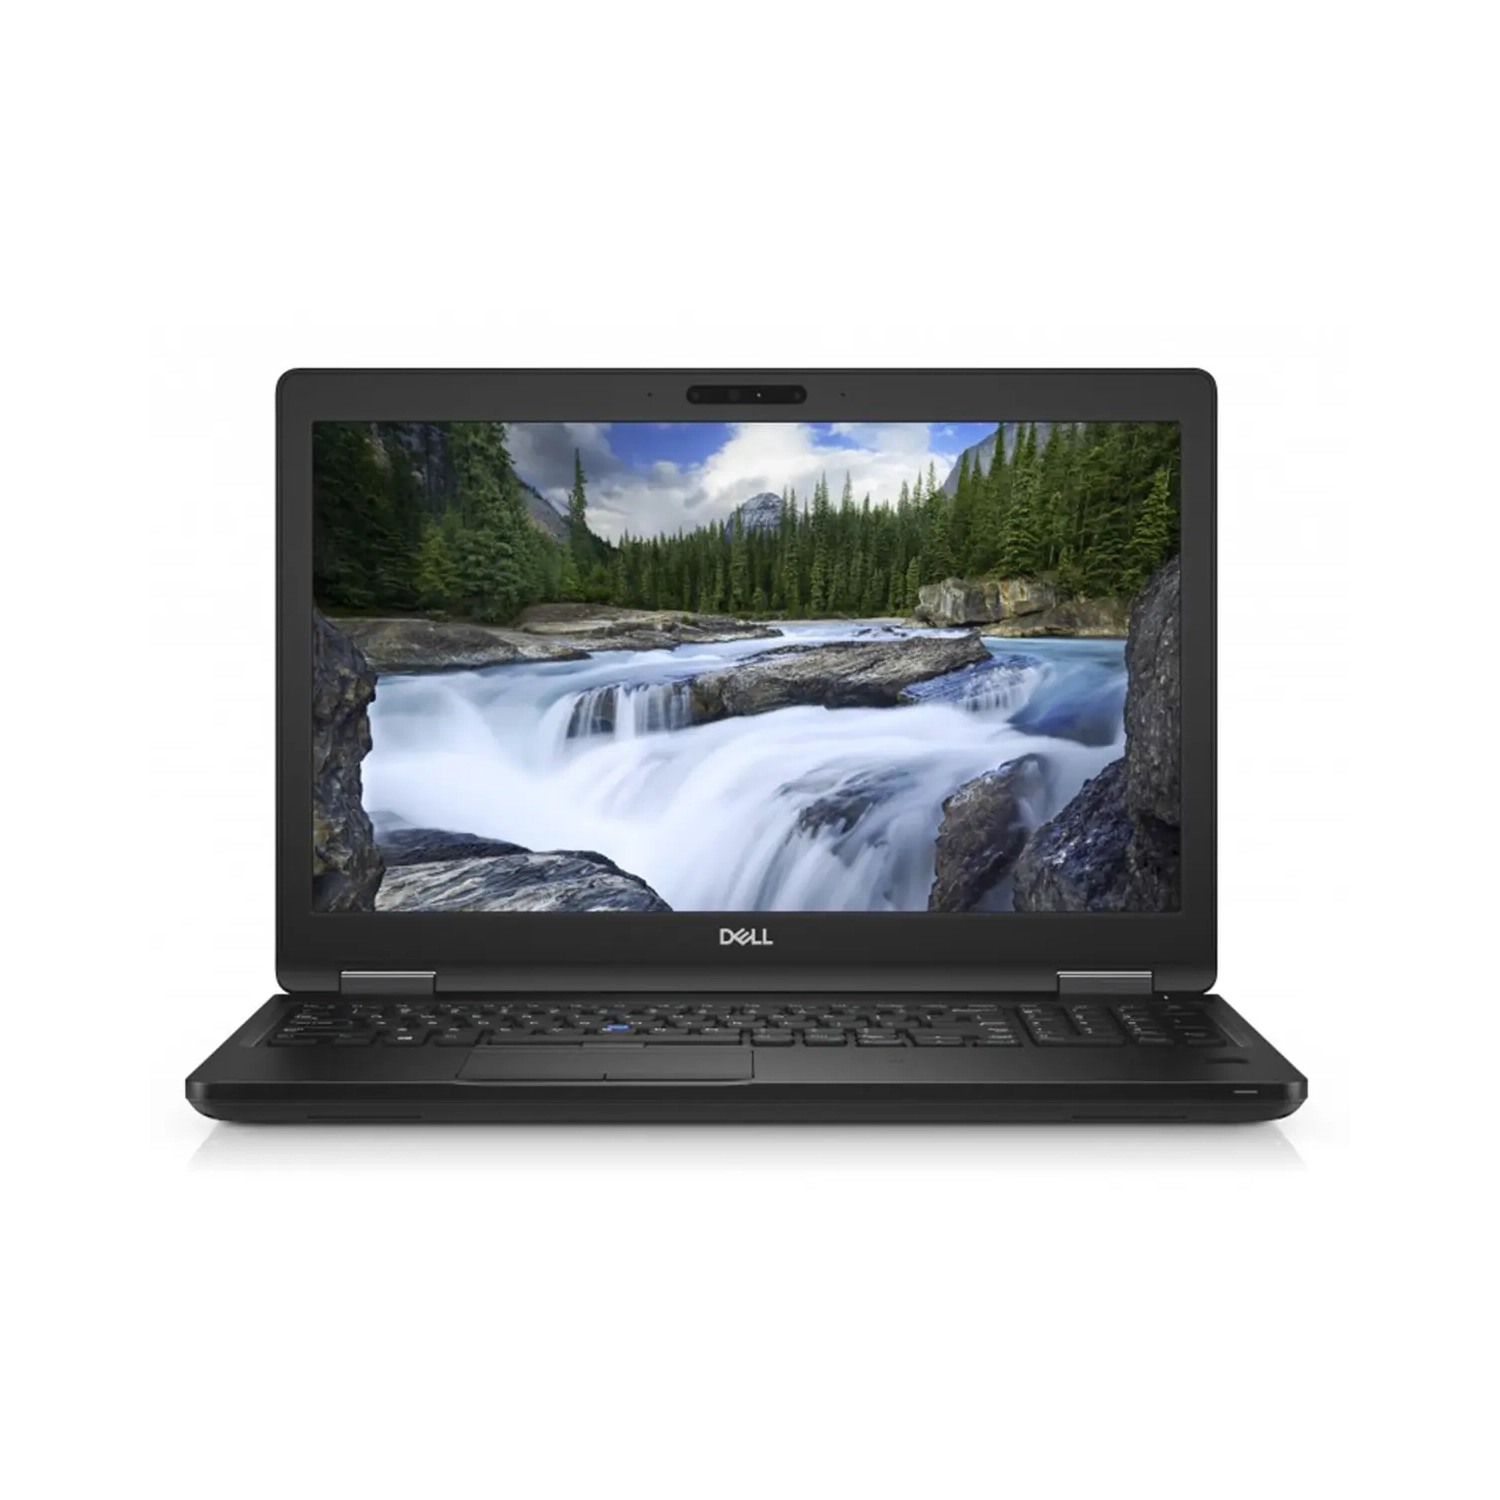 Refurbished (Good) Dell Latitude 5590 TOUCH SCREEN - 15.6"- Core i7 8650U- 32 GB RAM– New 1 TB SSD- Dedicated NVIDIA MX130-2GB - Windows 10 Pro (Good for multimedia and gaming)